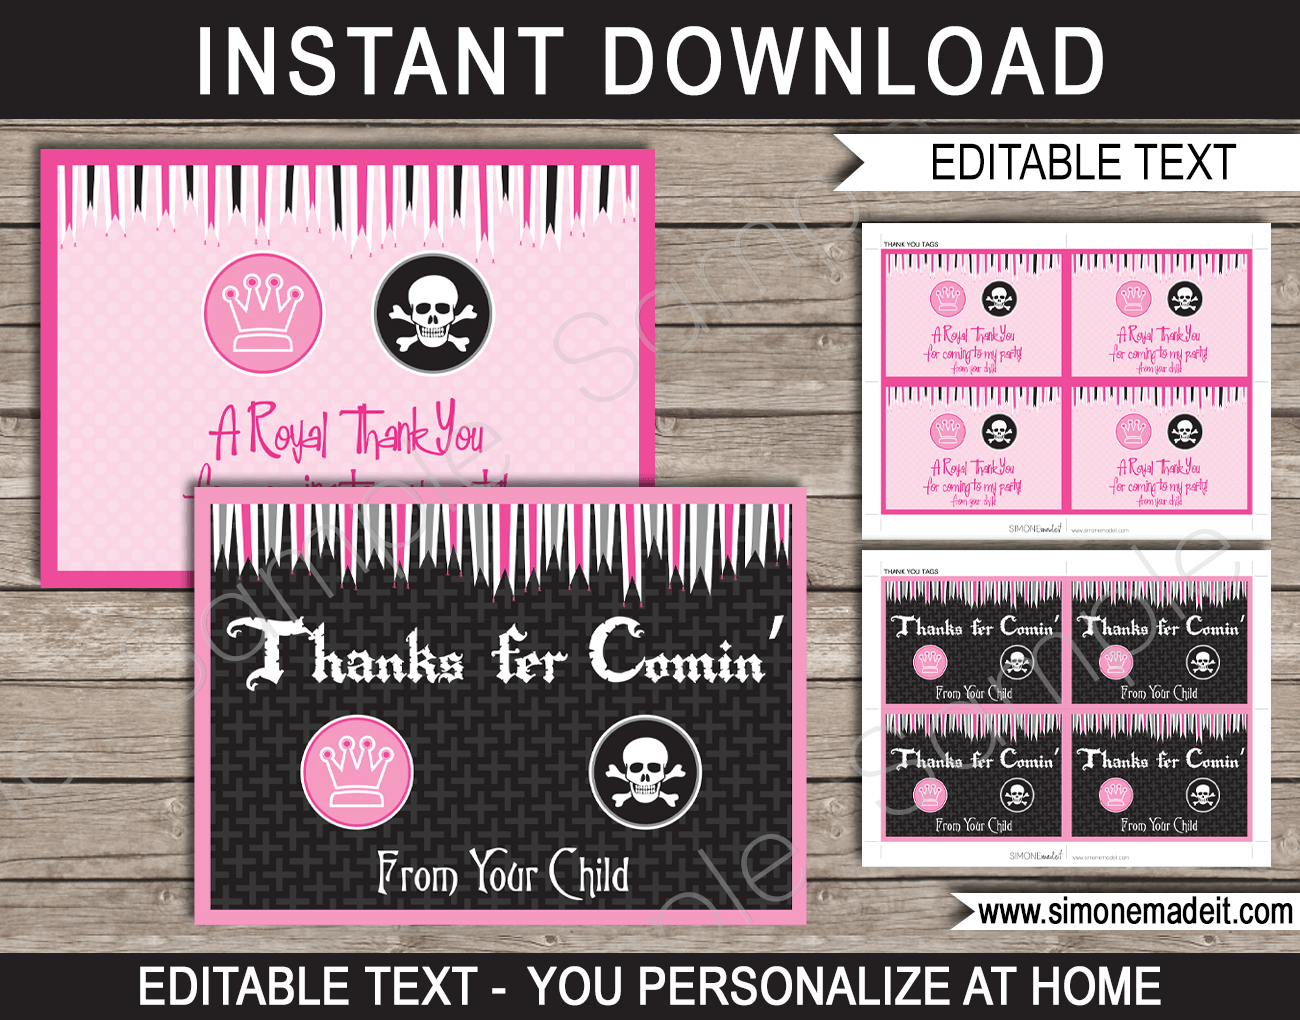 Pirates & Princesses Party Favor Tags | Thank You Tags | Birthday Party | Editable DIY Template | $3.00 INSTANT DOWNLOAD via SIMONEmadeit.com